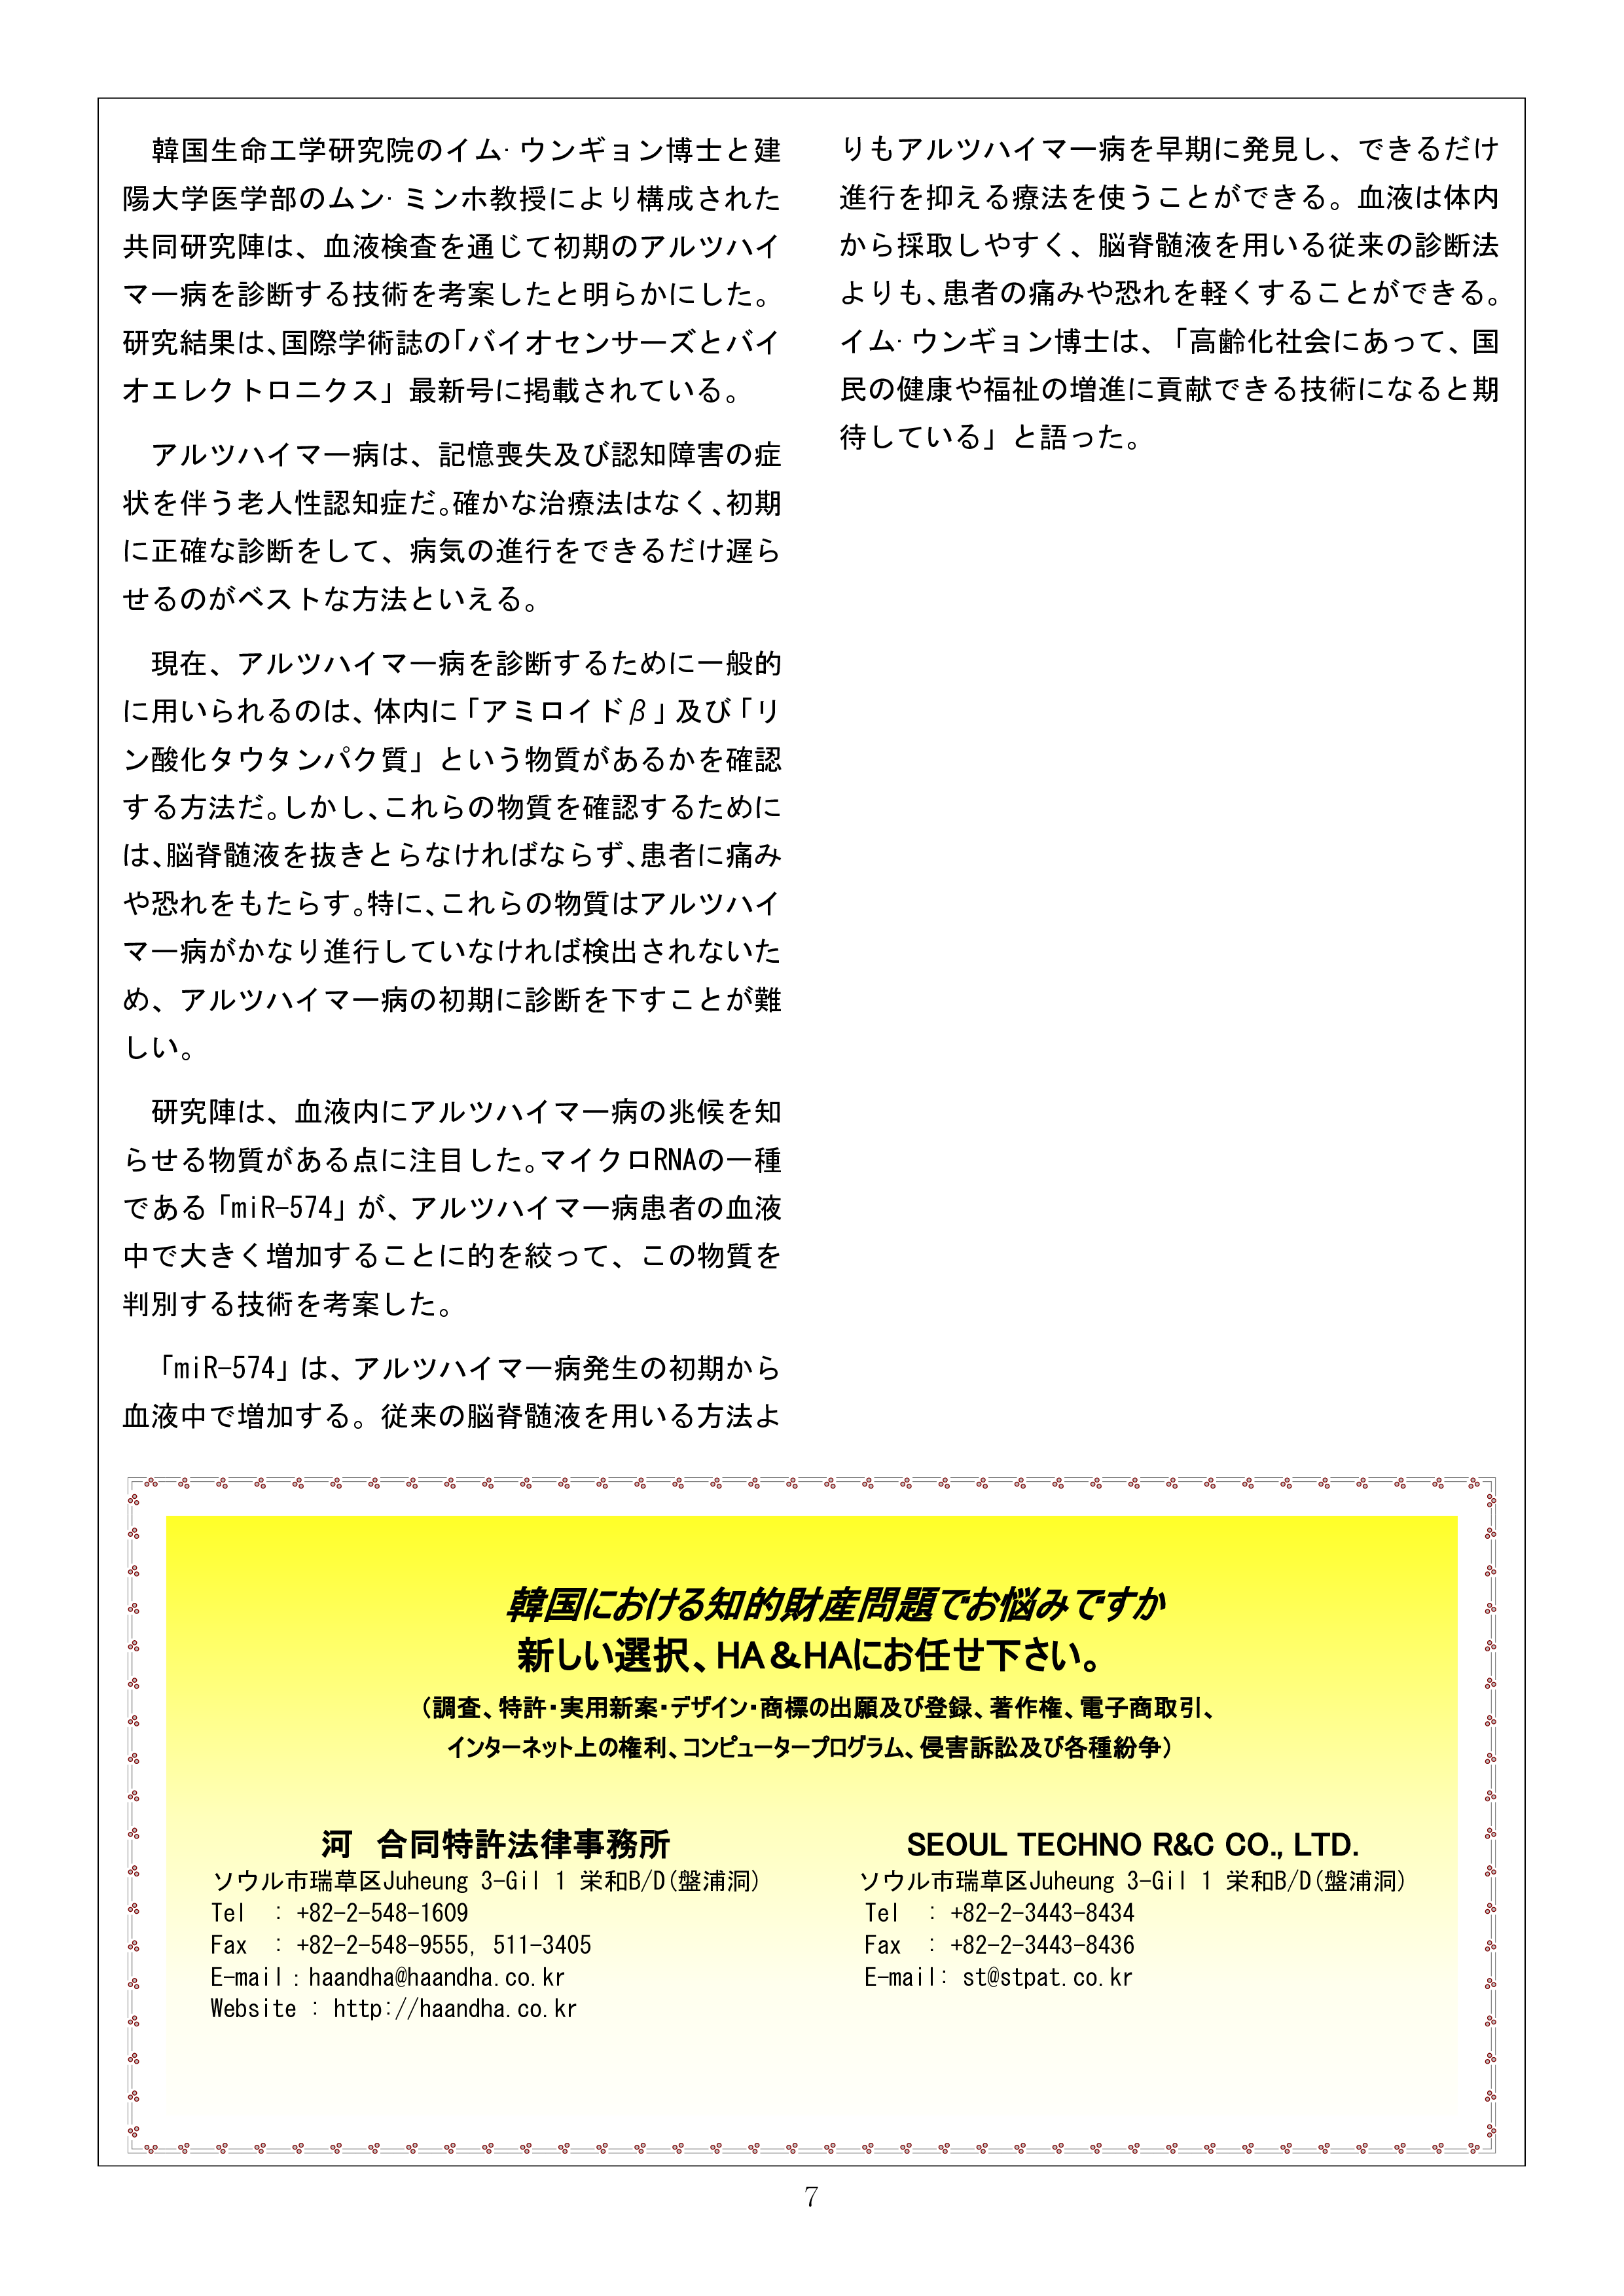 Newsletter_202206_7.png